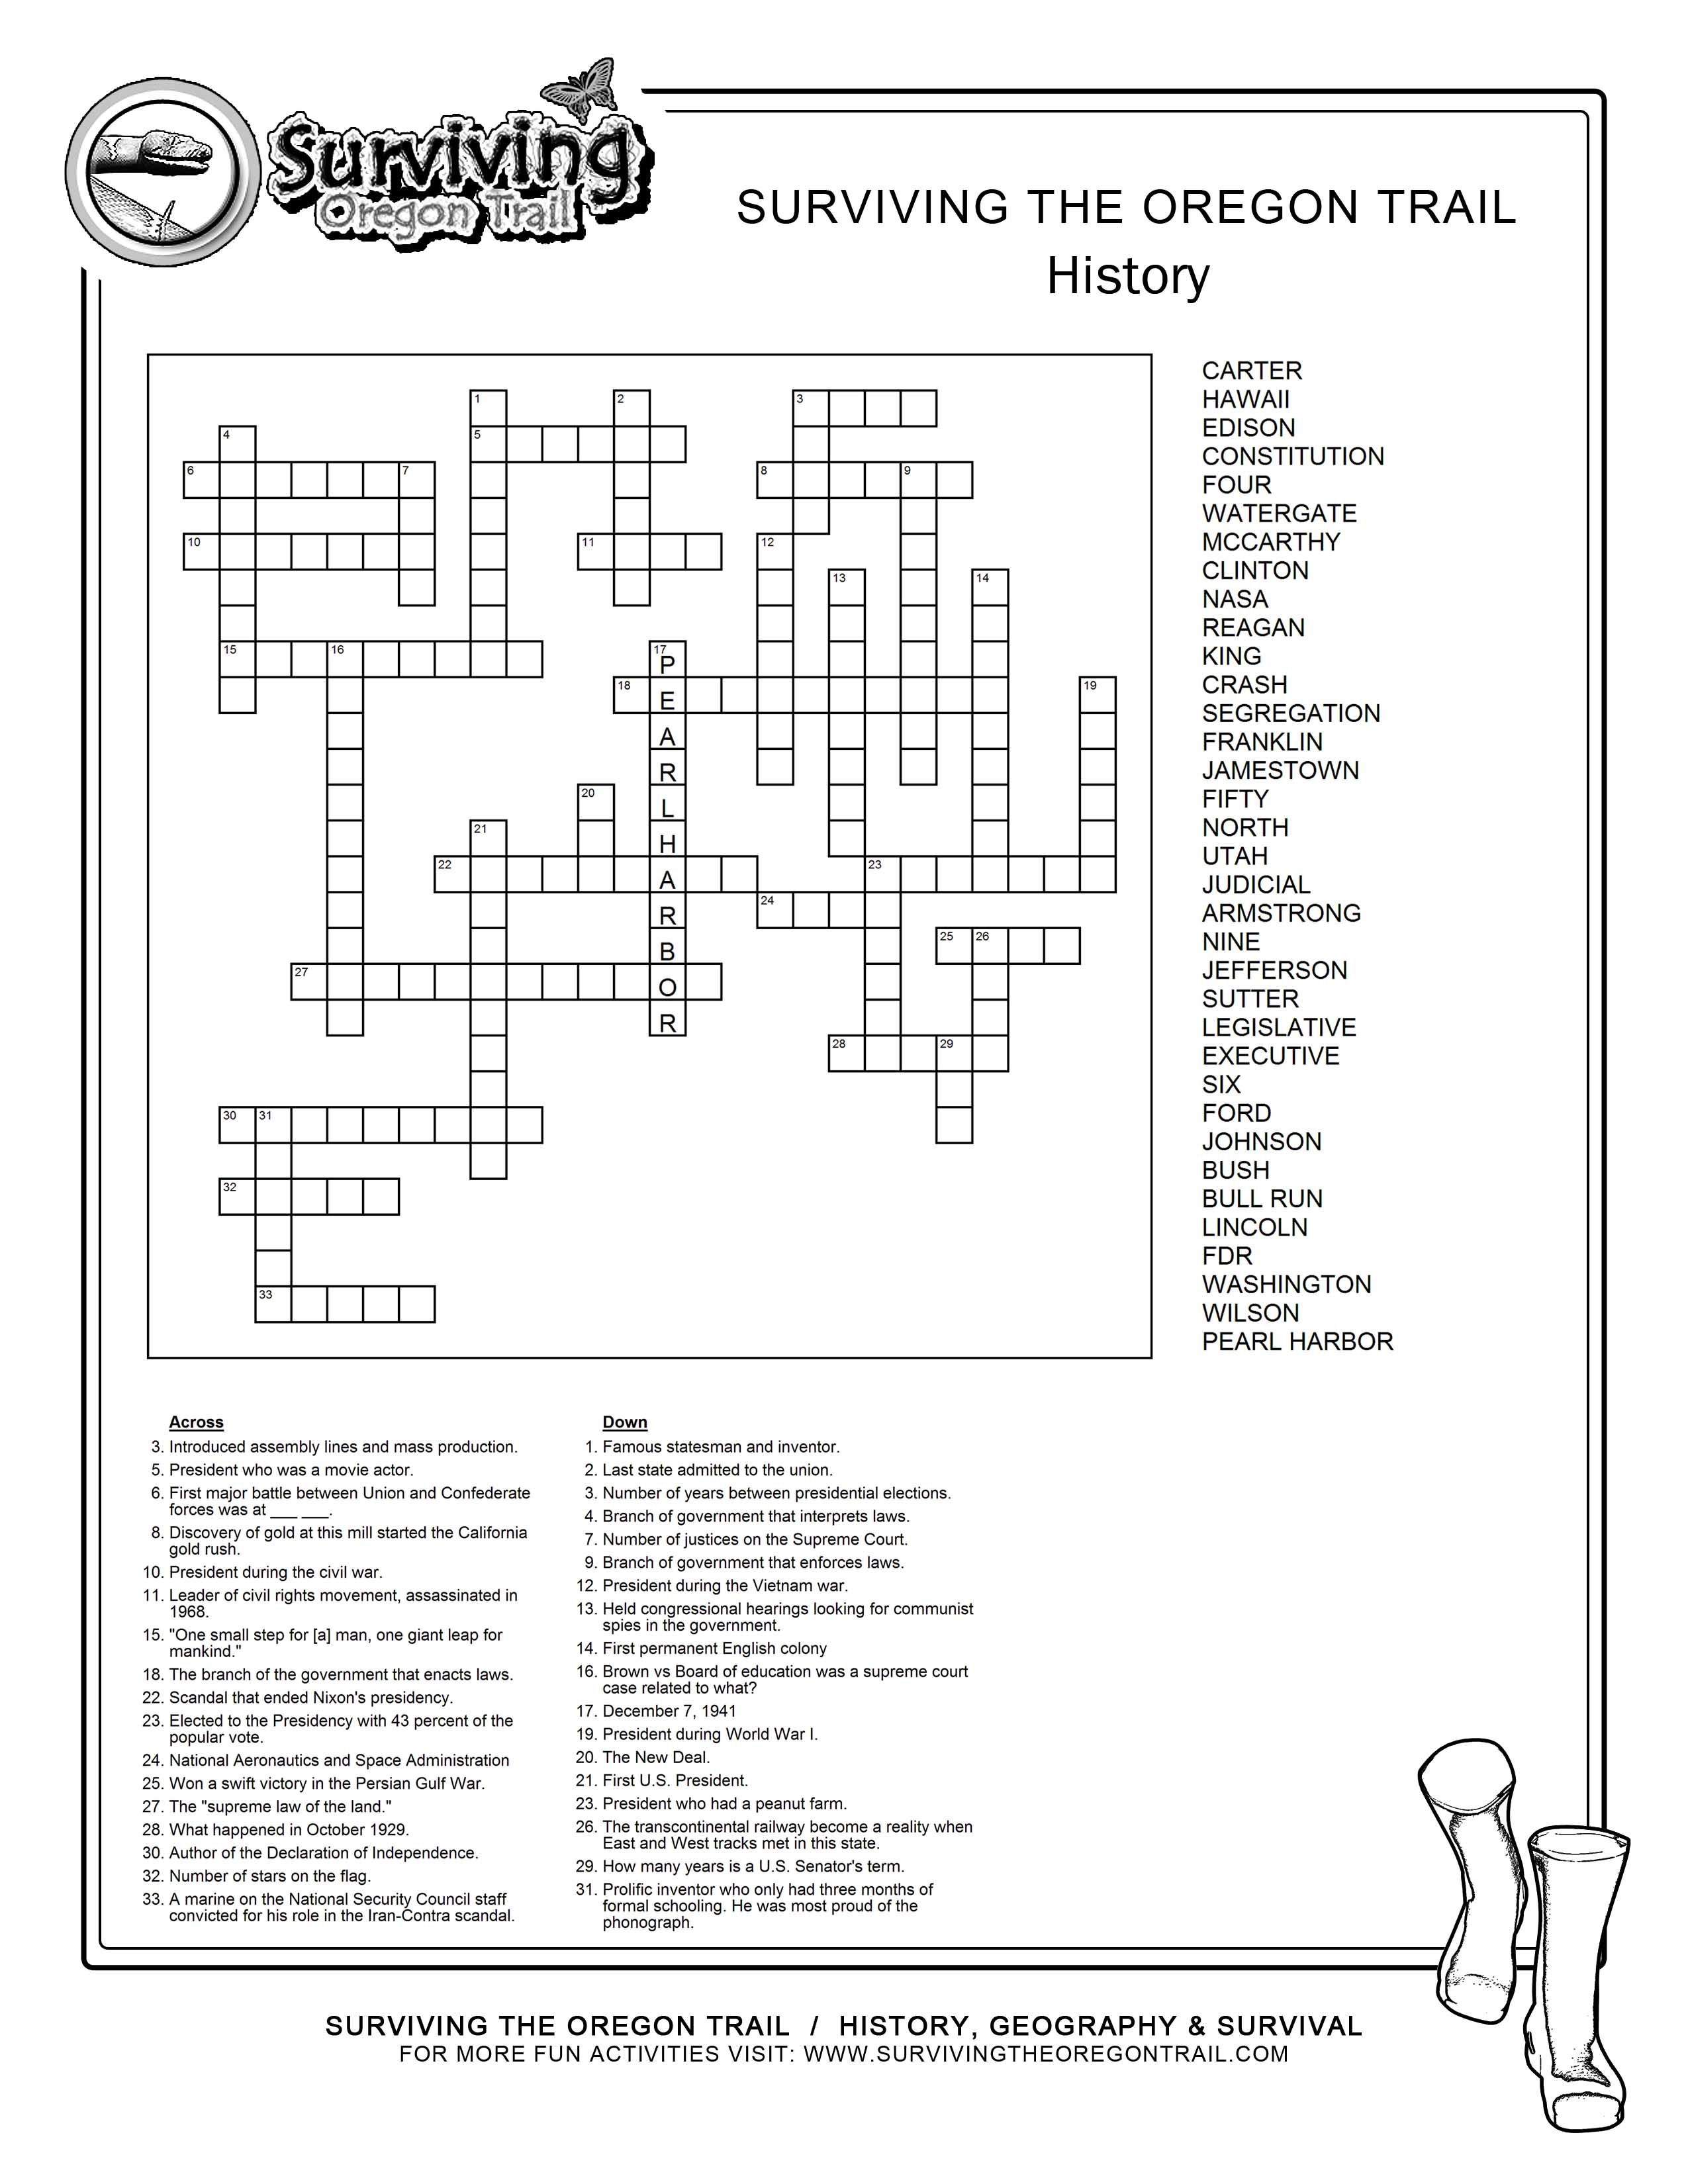 Fill Free To Save This Historical Crossword Puzzle To Your Computer - Printable Computer Crossword Puzzles With Answers